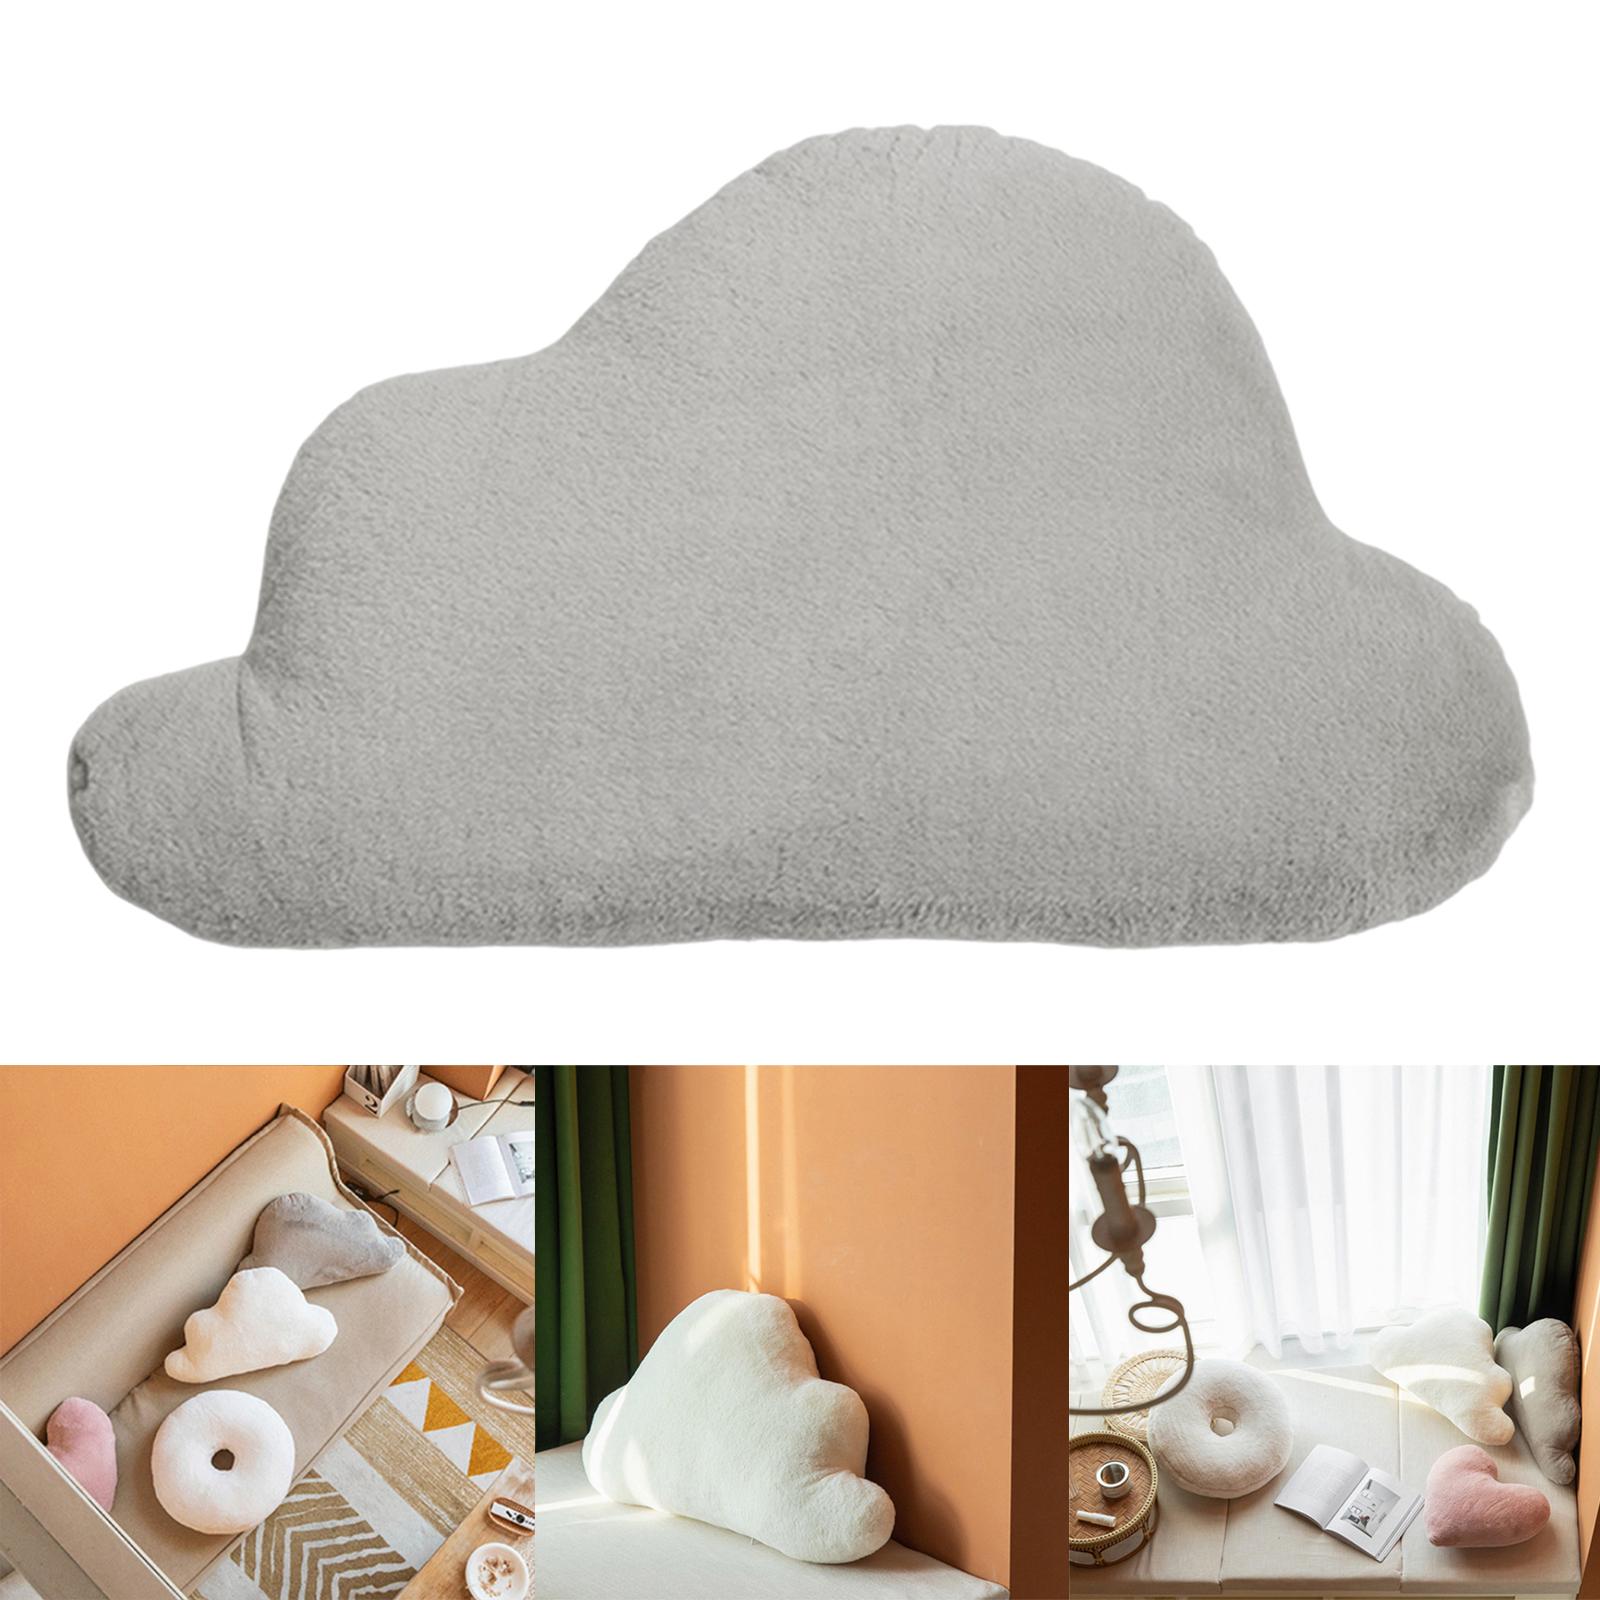 Plush Throw Pillows Filled Cute Decorative Pillow for Couch Bed Grey Cloud